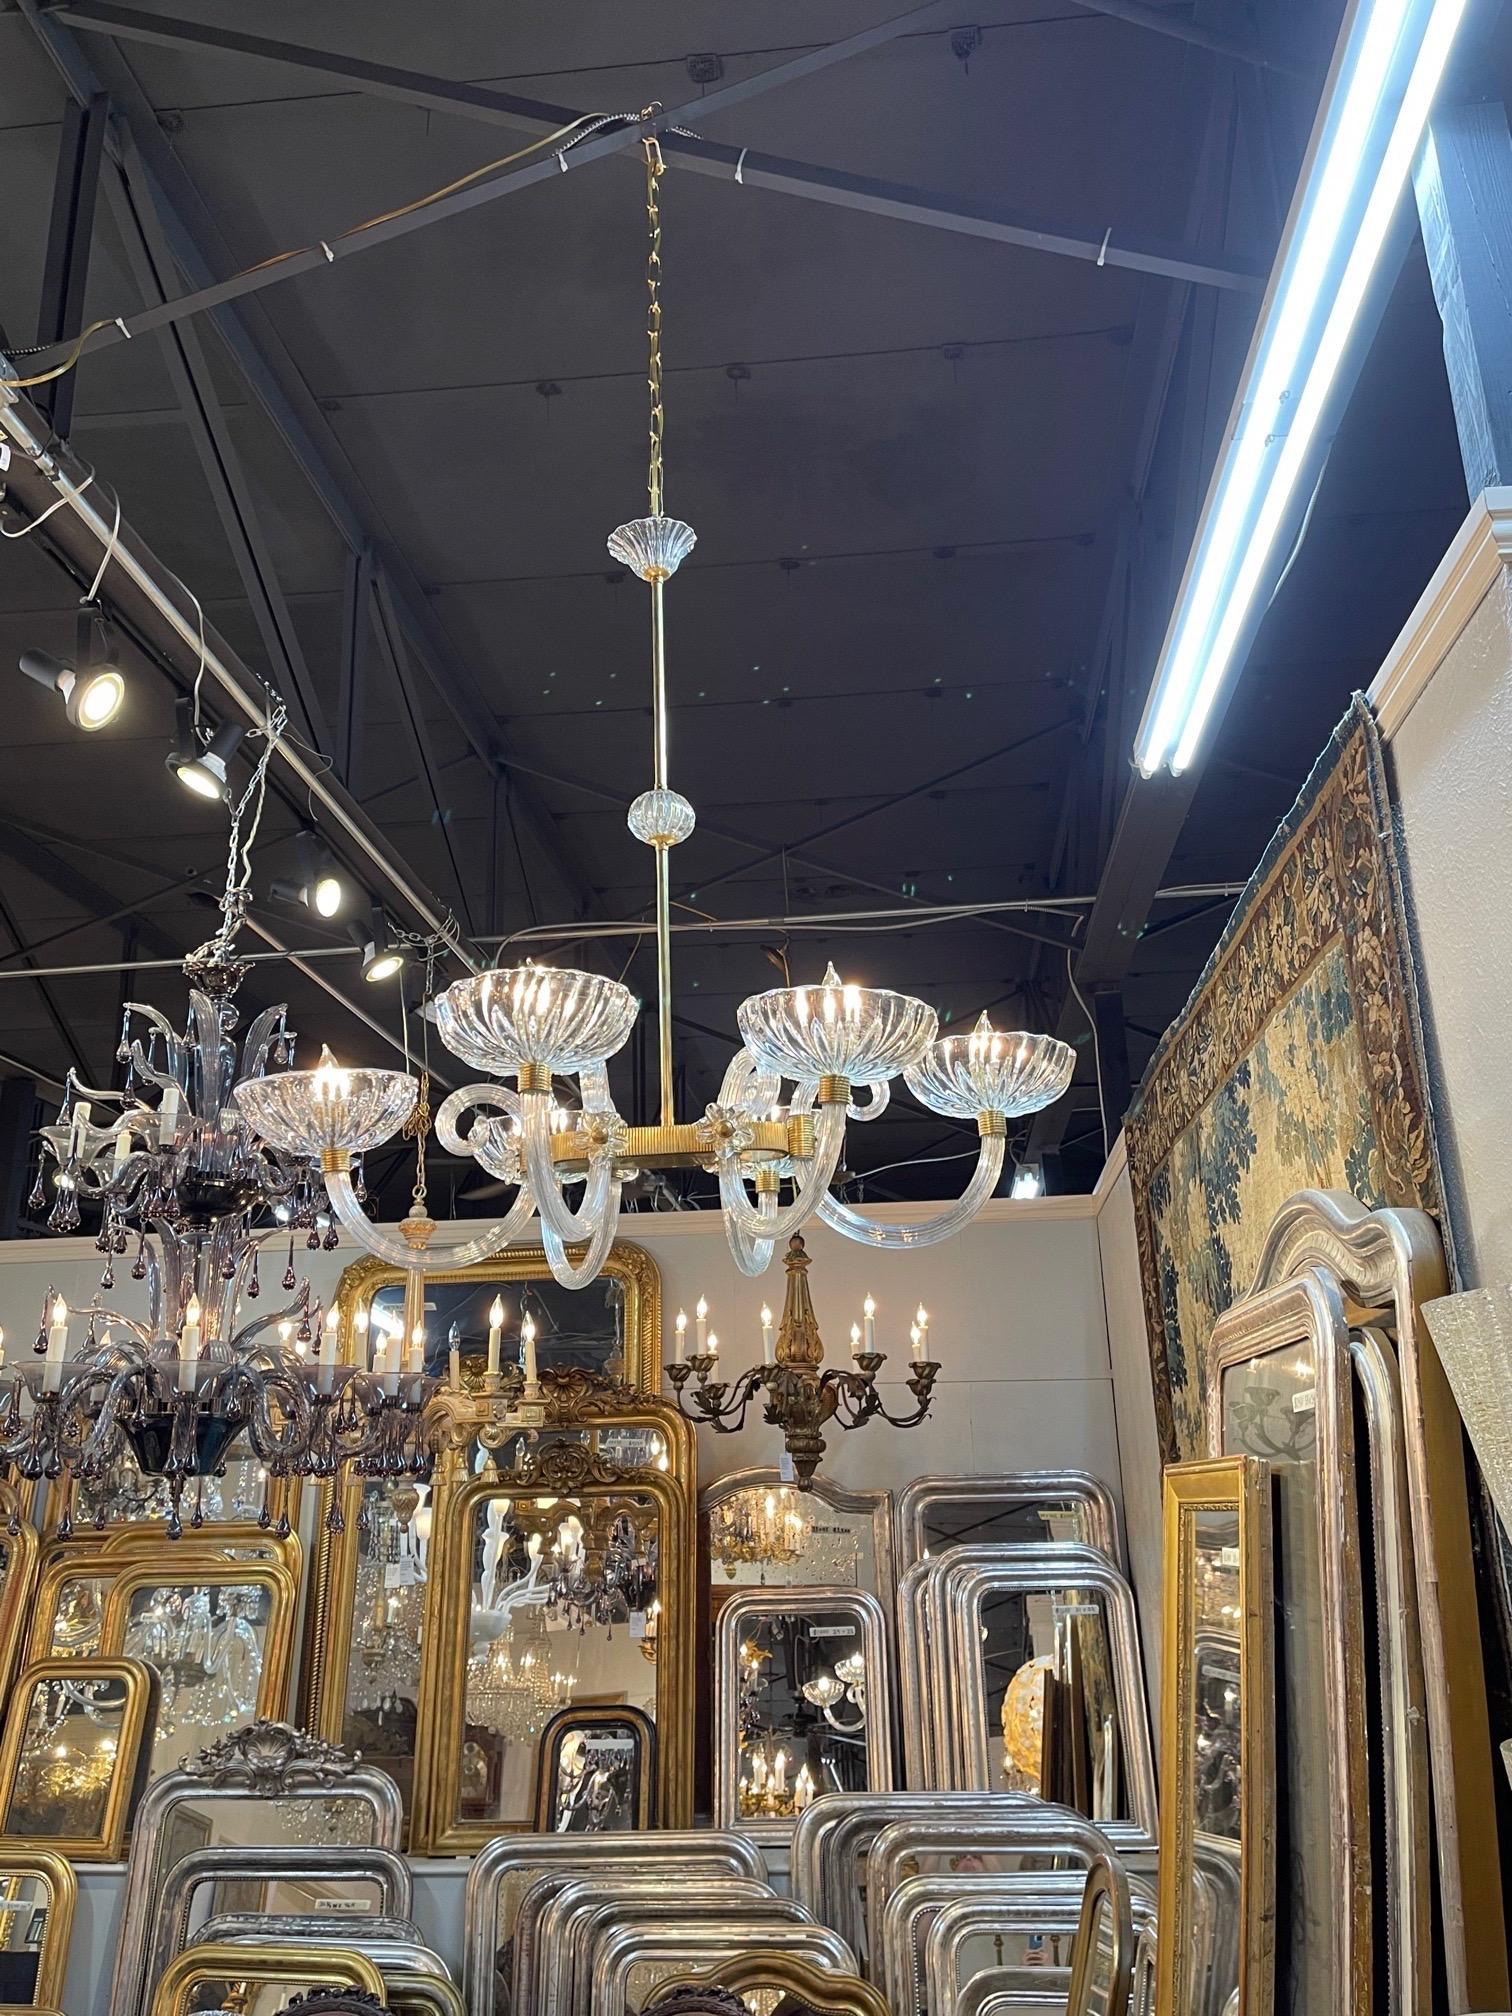 Fabulous vintage Italian glass and brass 6 light chandelier by Barovier and Toso. Sparkling glass and gorgeous brass create a very polished look. Stunning!